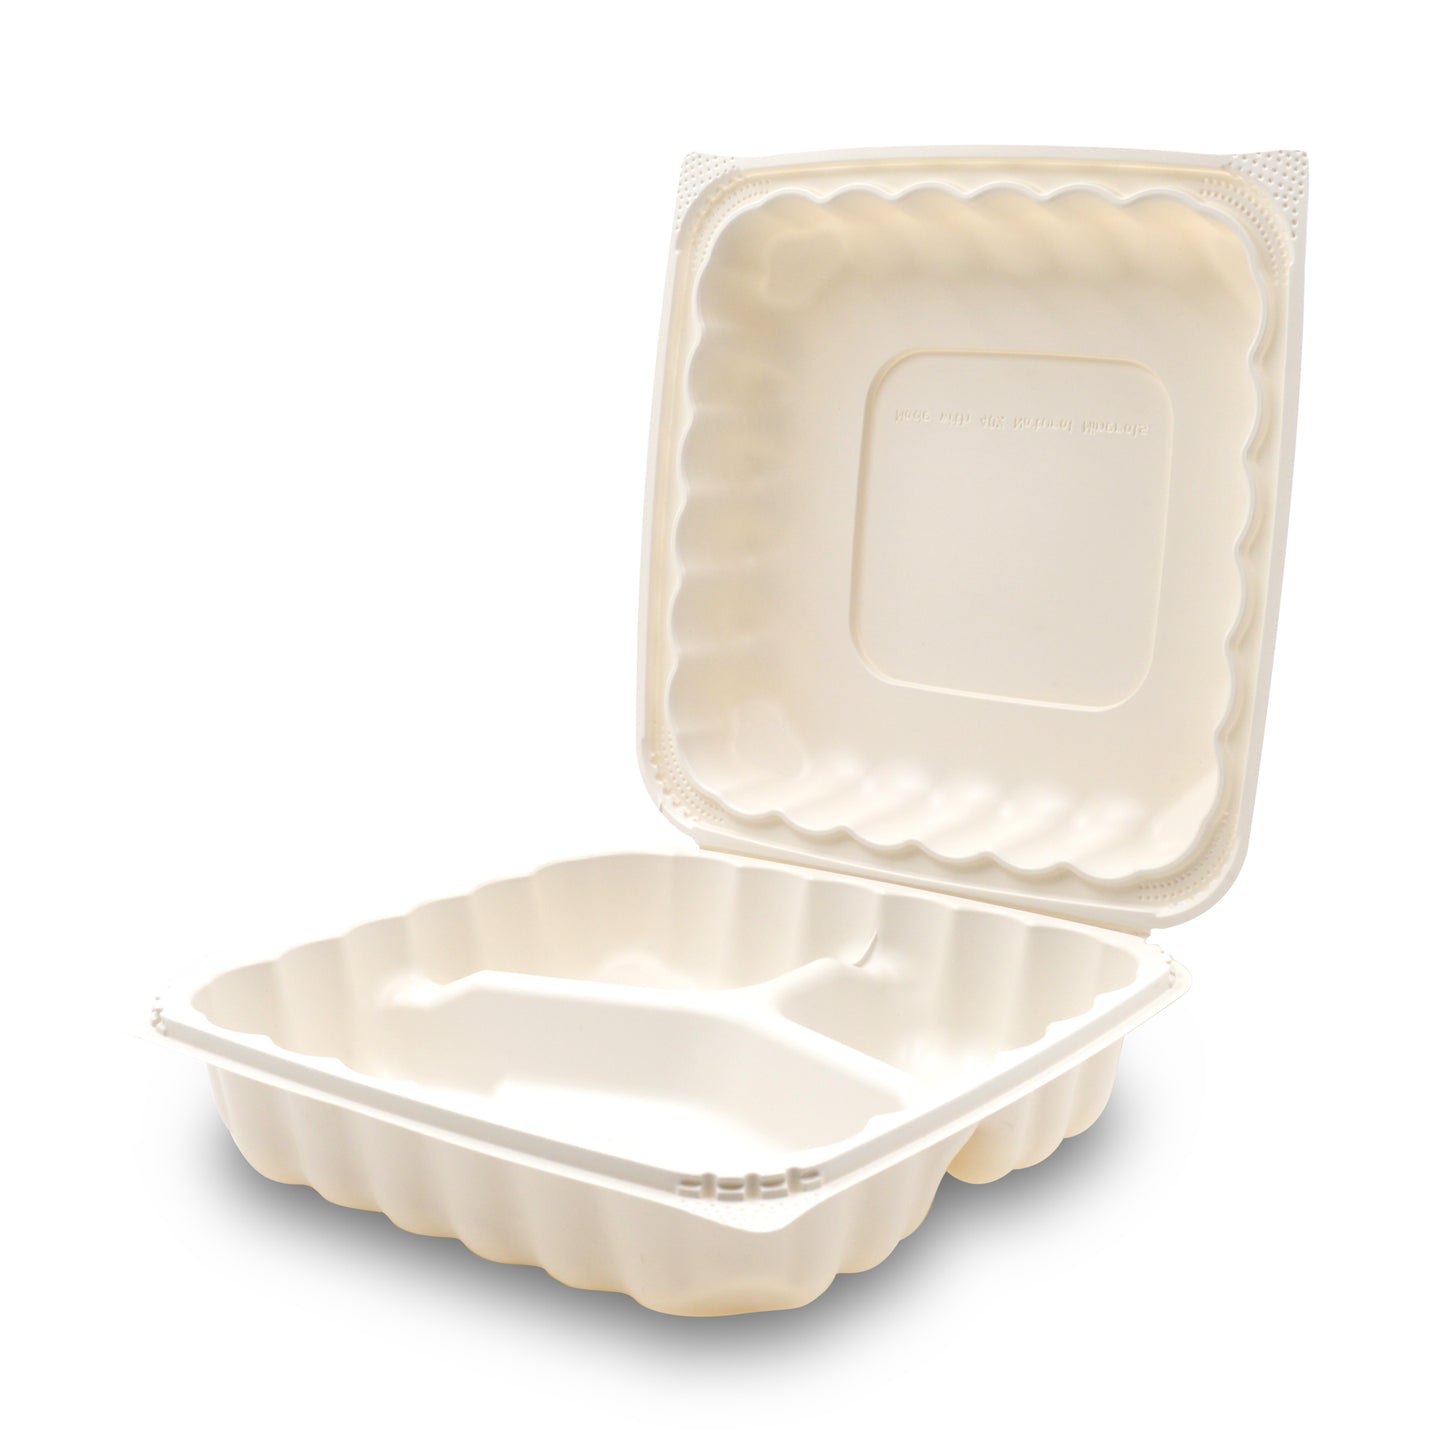 360-001-993 EarthPro Hinged MFPP 9x9 carry-out tray, three compartment